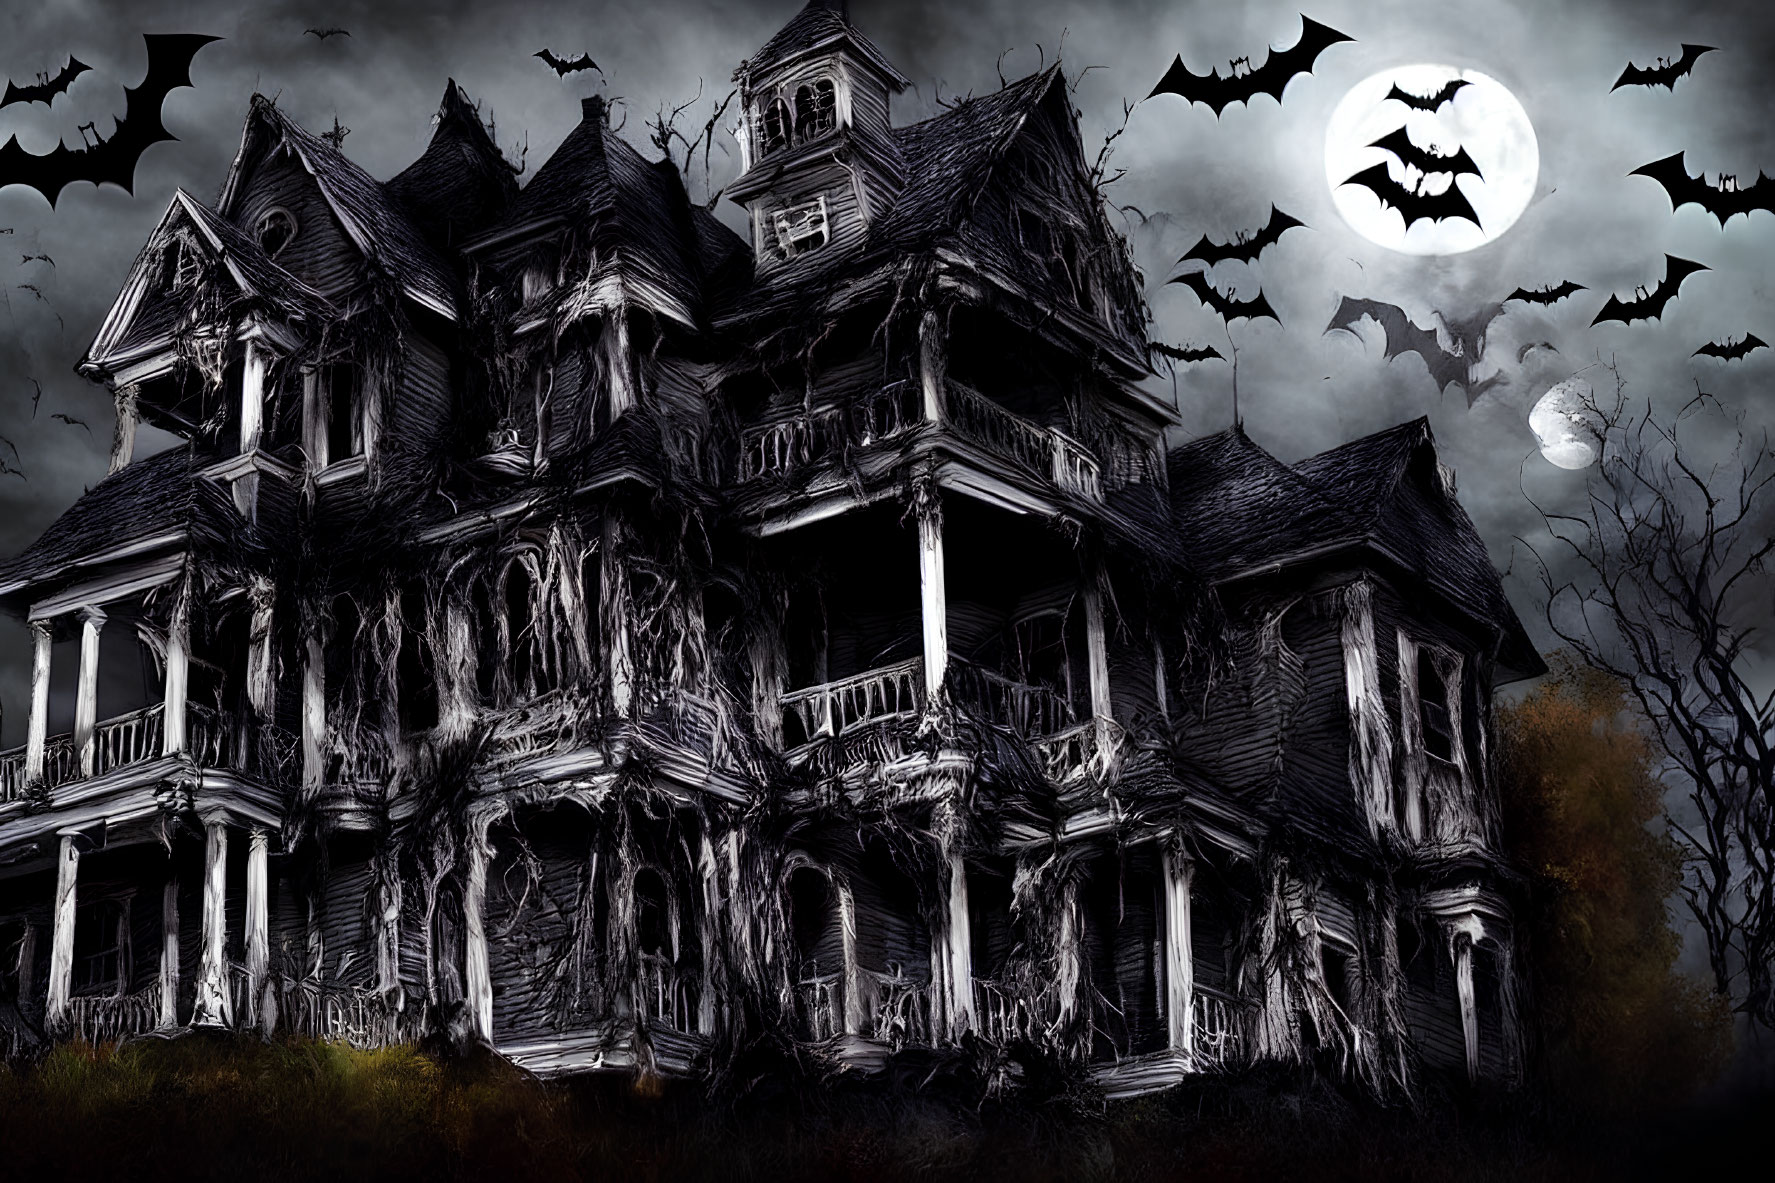 Gothic haunted house with bats under full moon